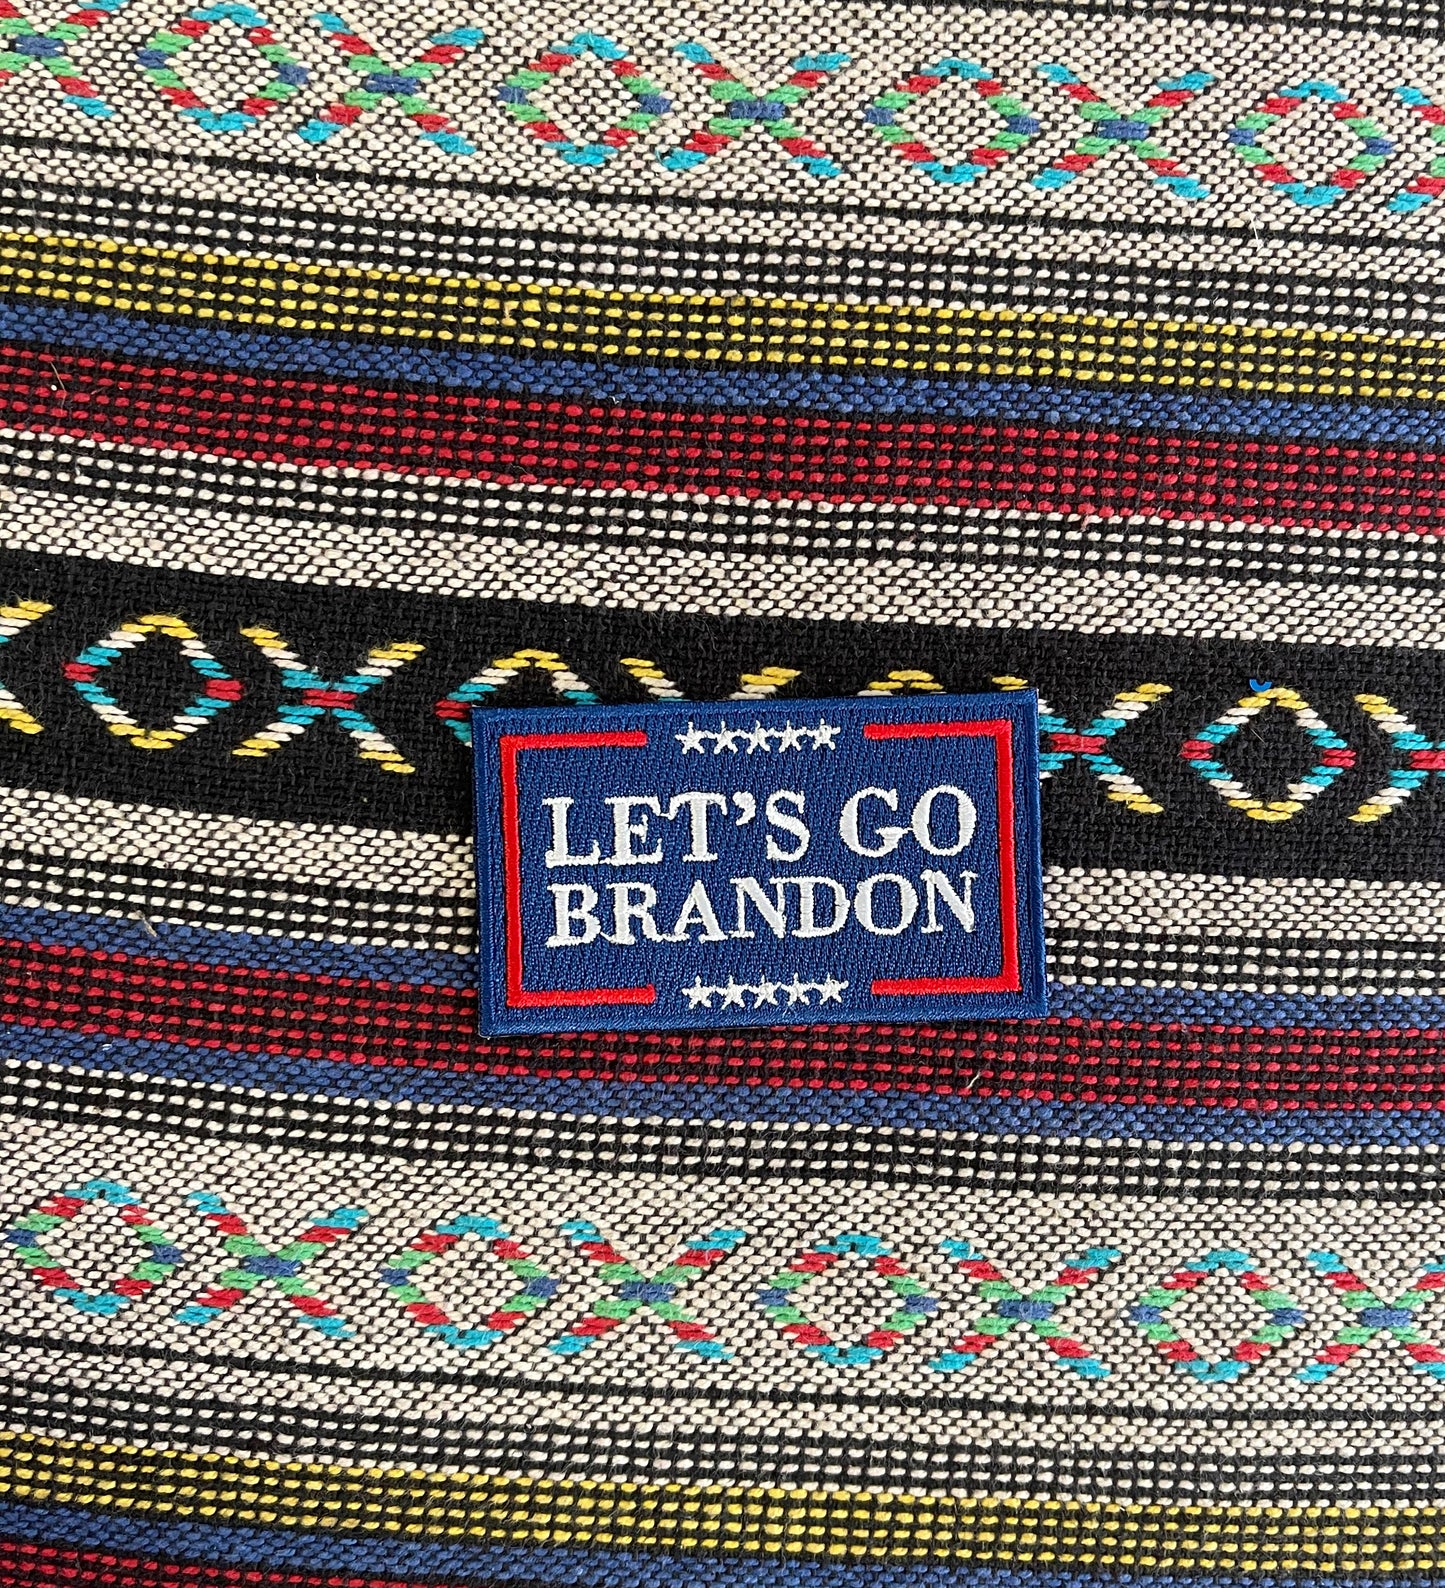 Let's Go Brandon Patches [2 Styles]